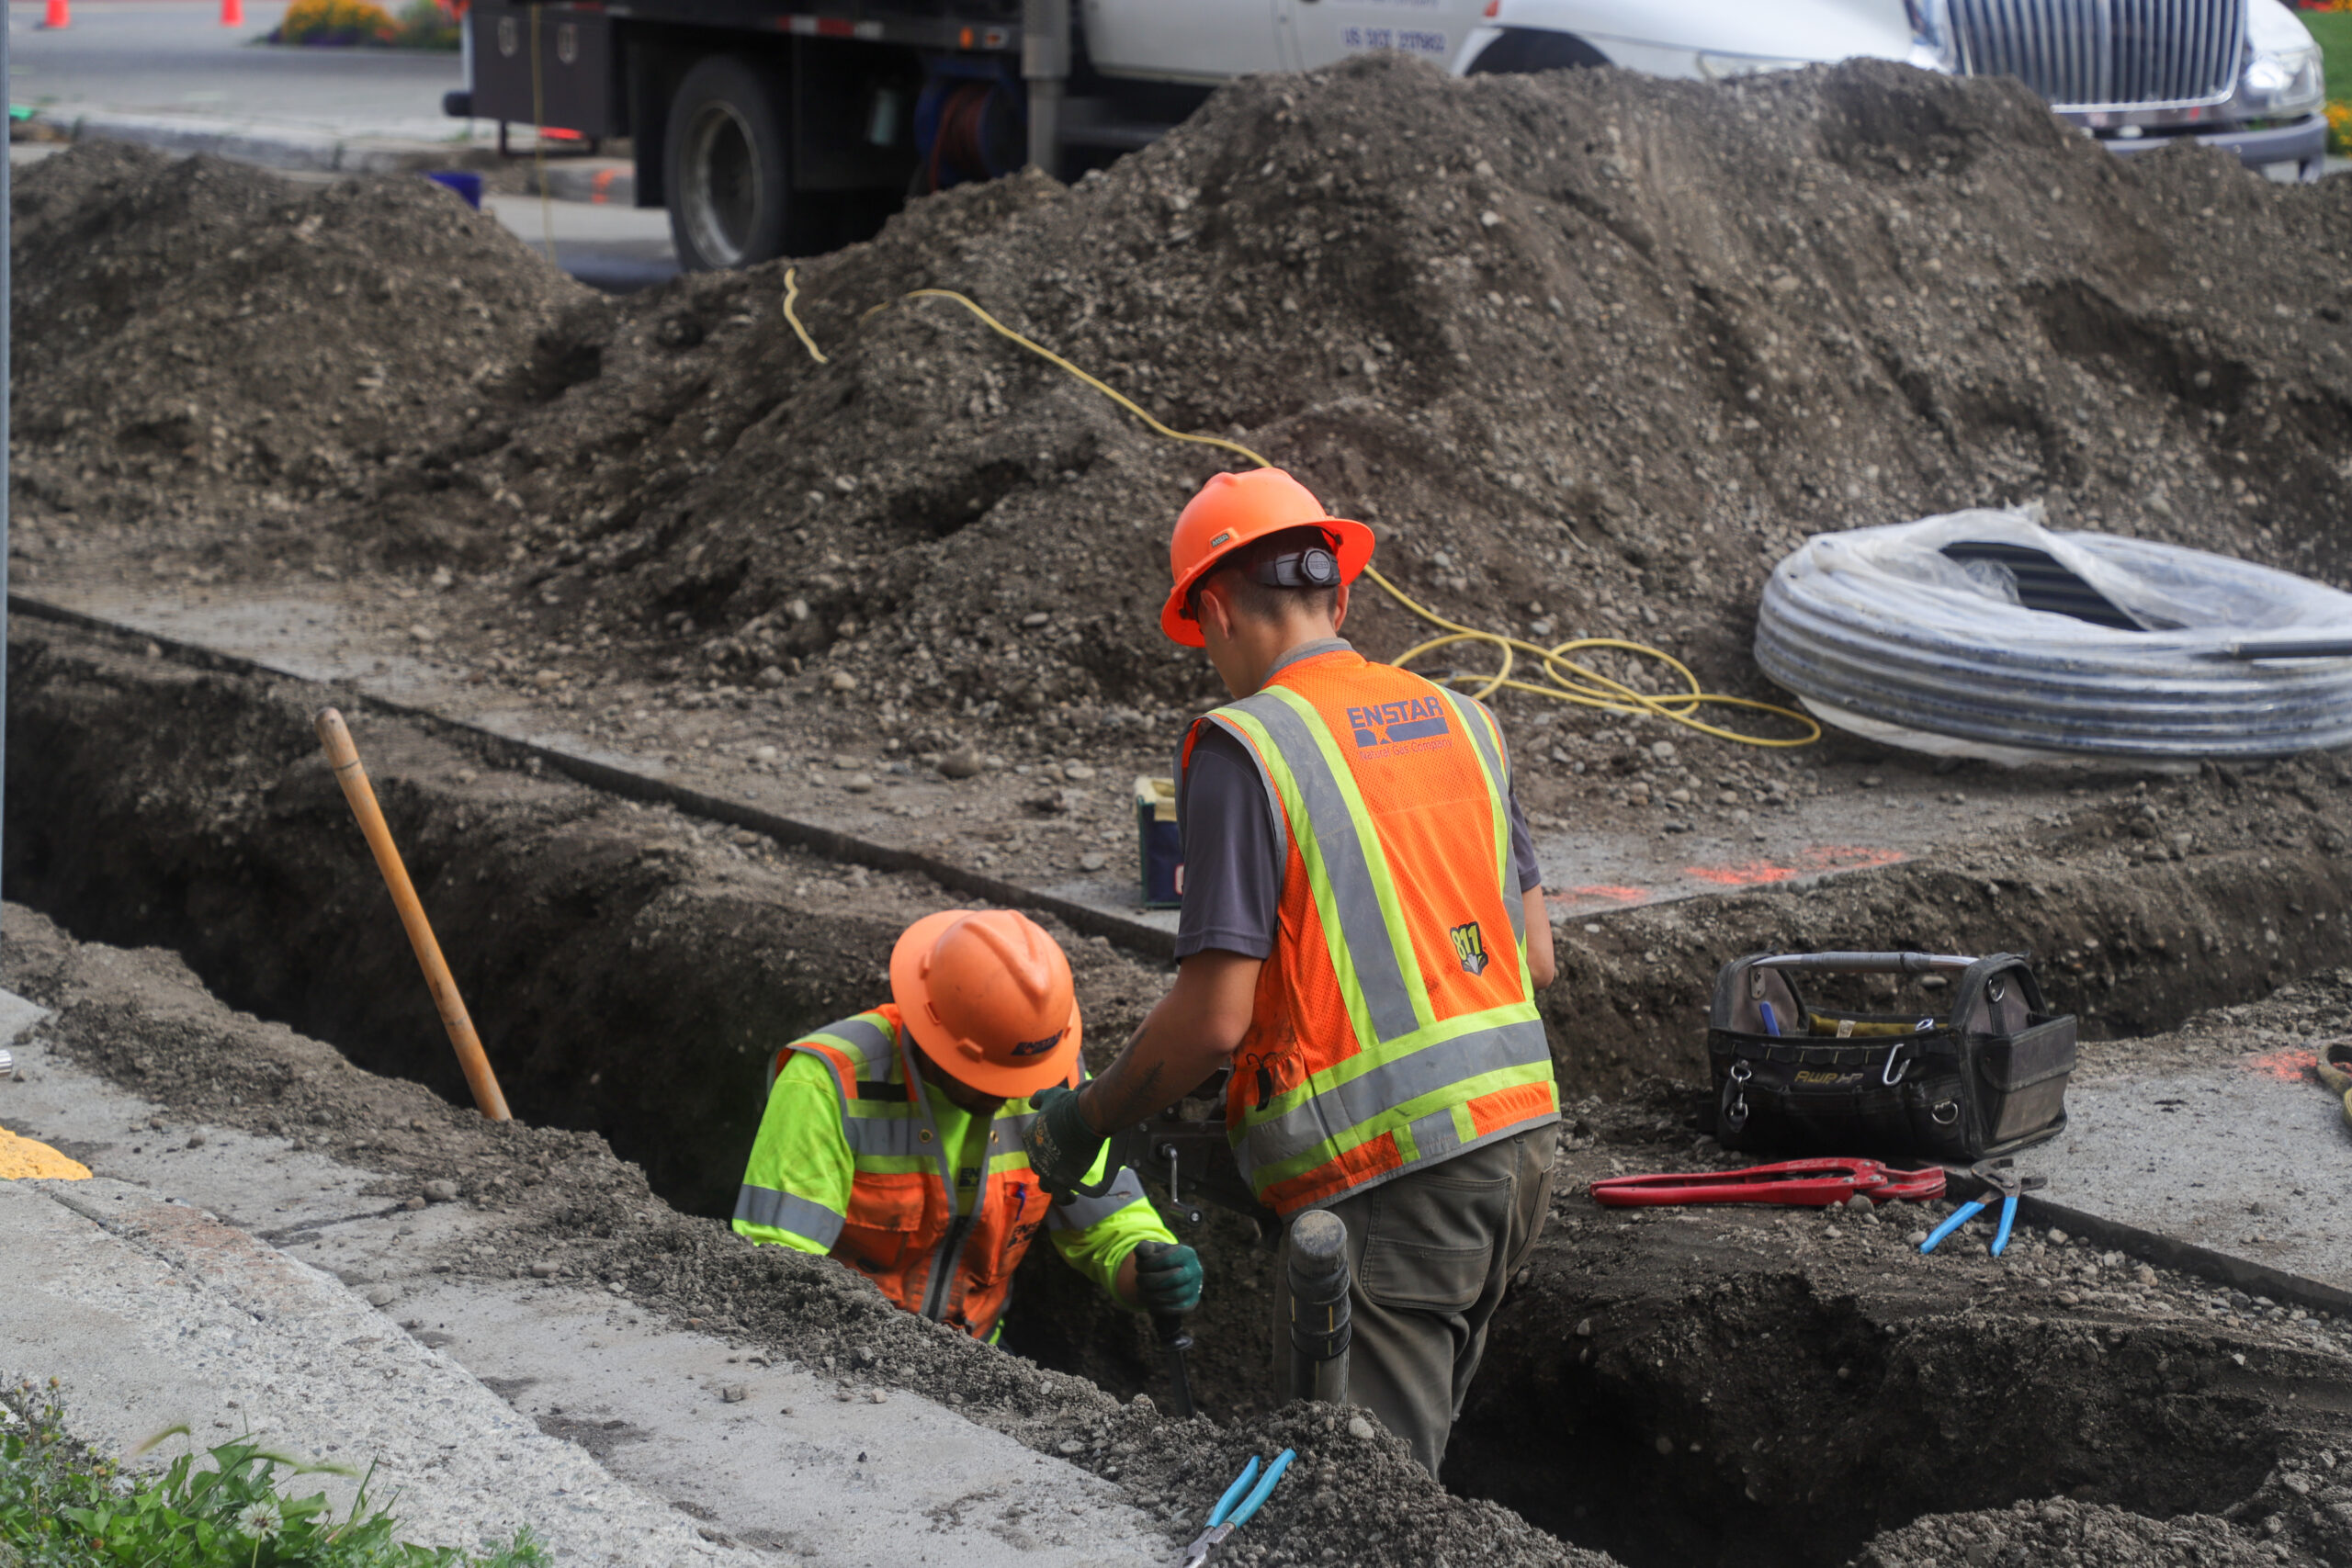 Two people in hardhats and safety vests dig a trench.